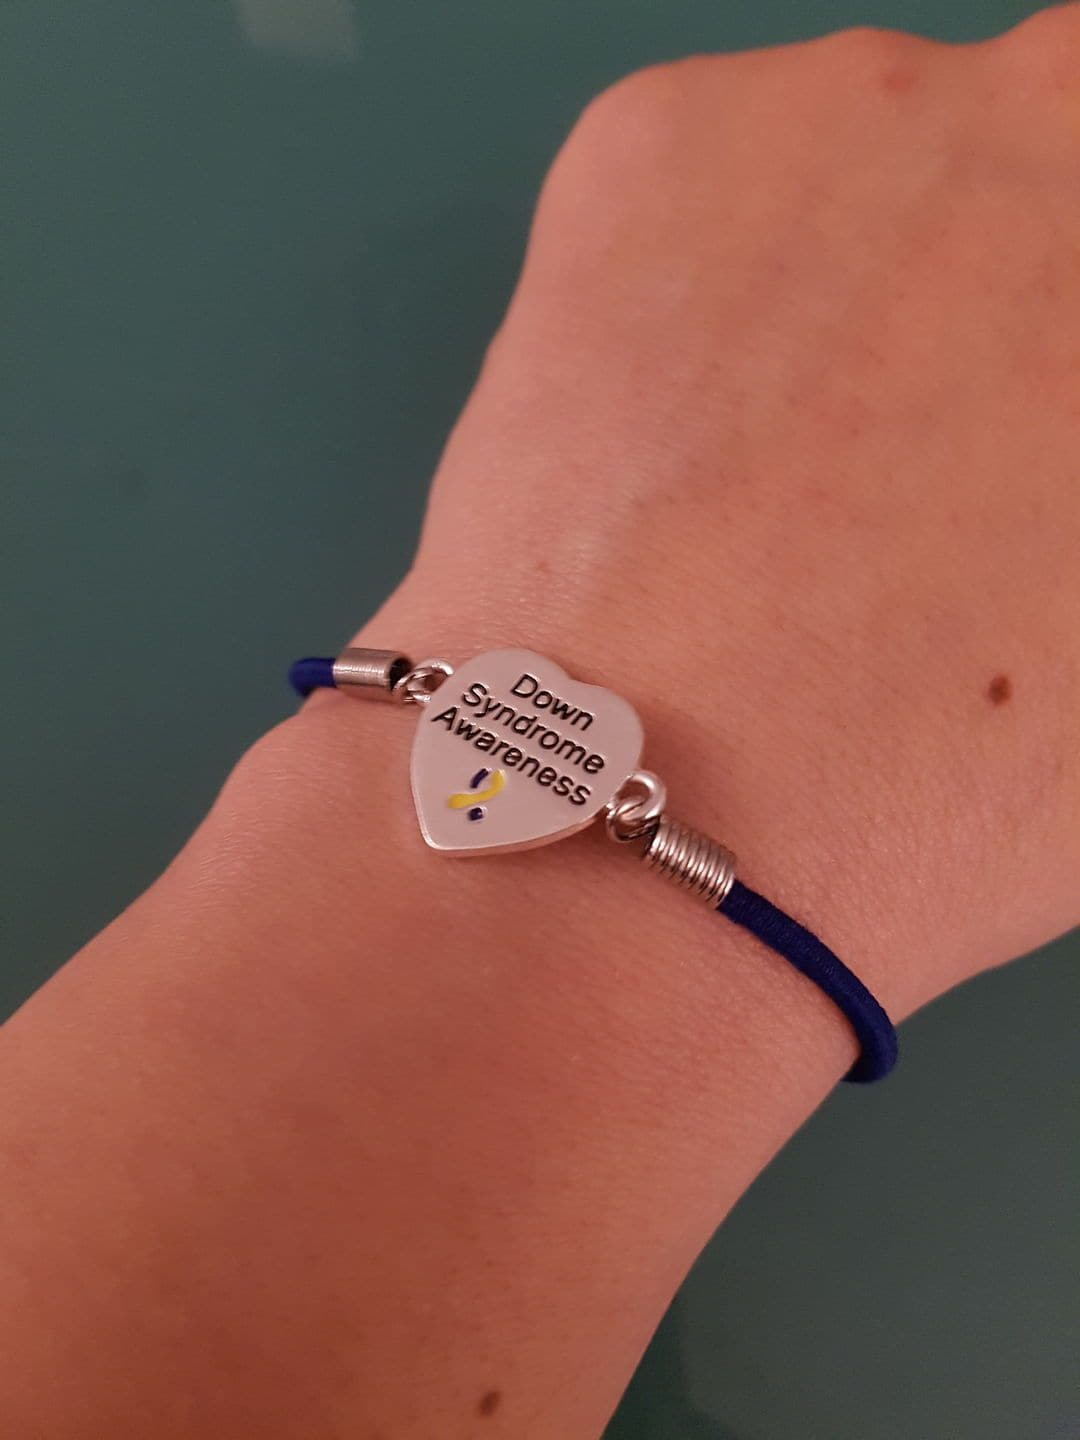 Down Syndrome Awareness Heart Stretch Bracelet- The House of Awareness